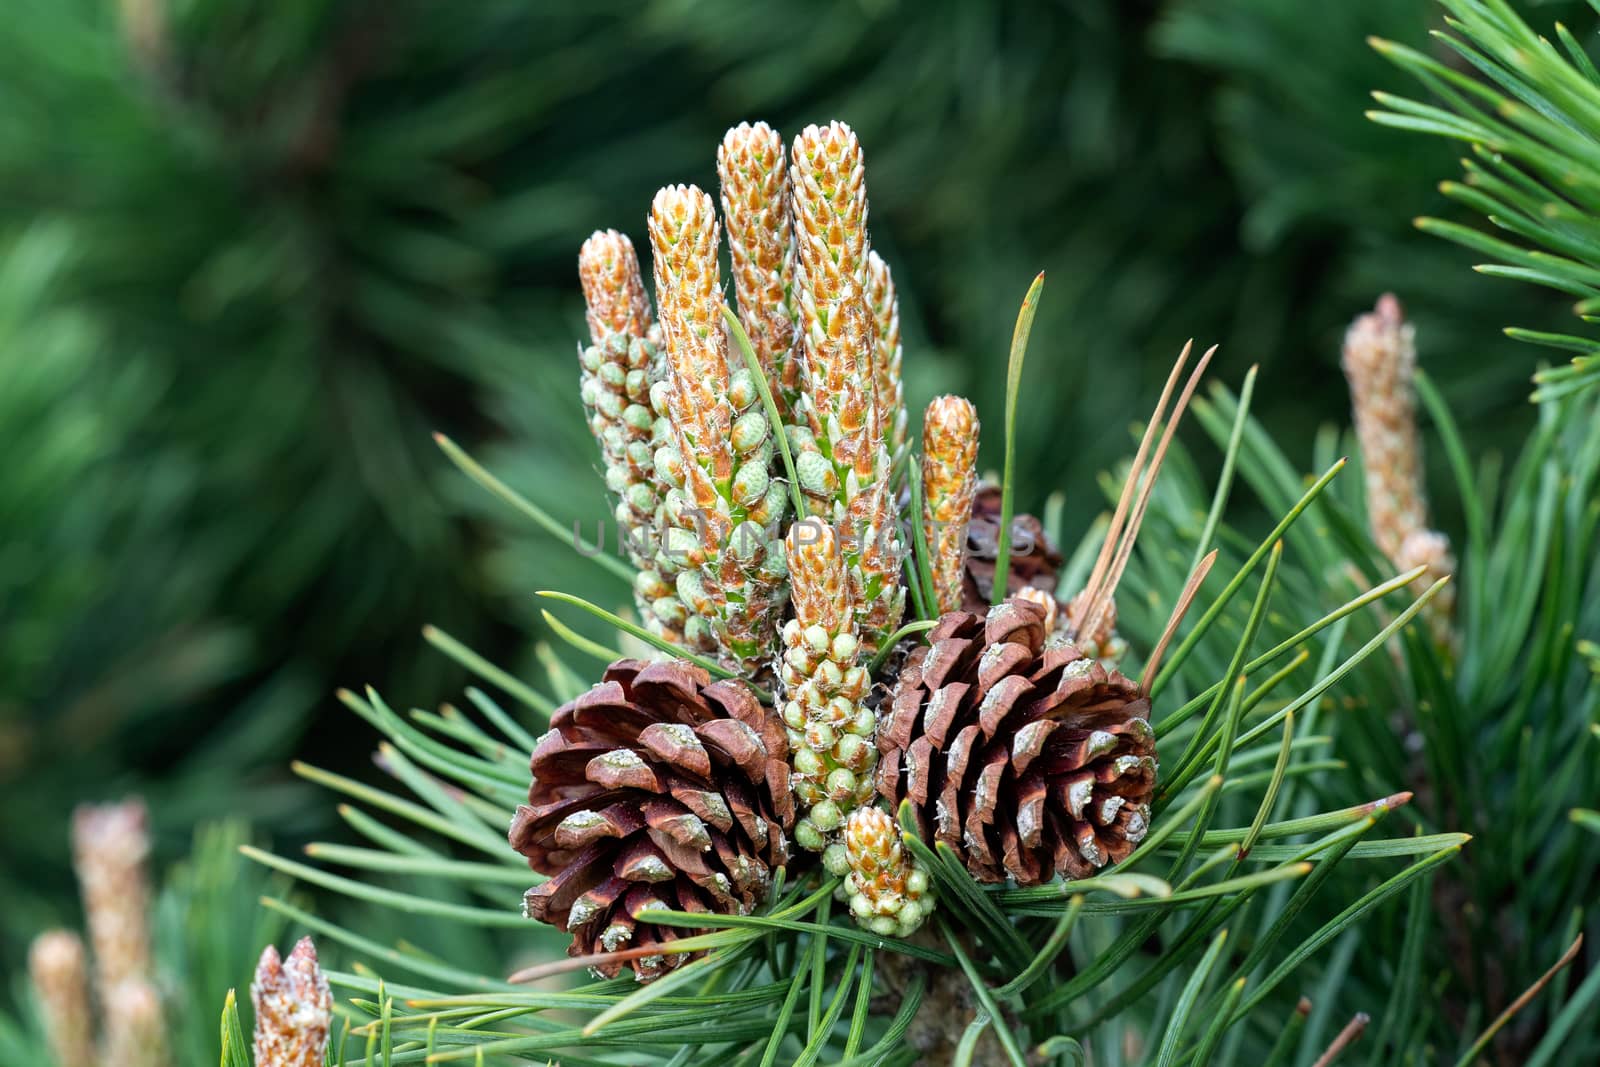 Small pine cones at the end of branches. Blurred pine needles in background.